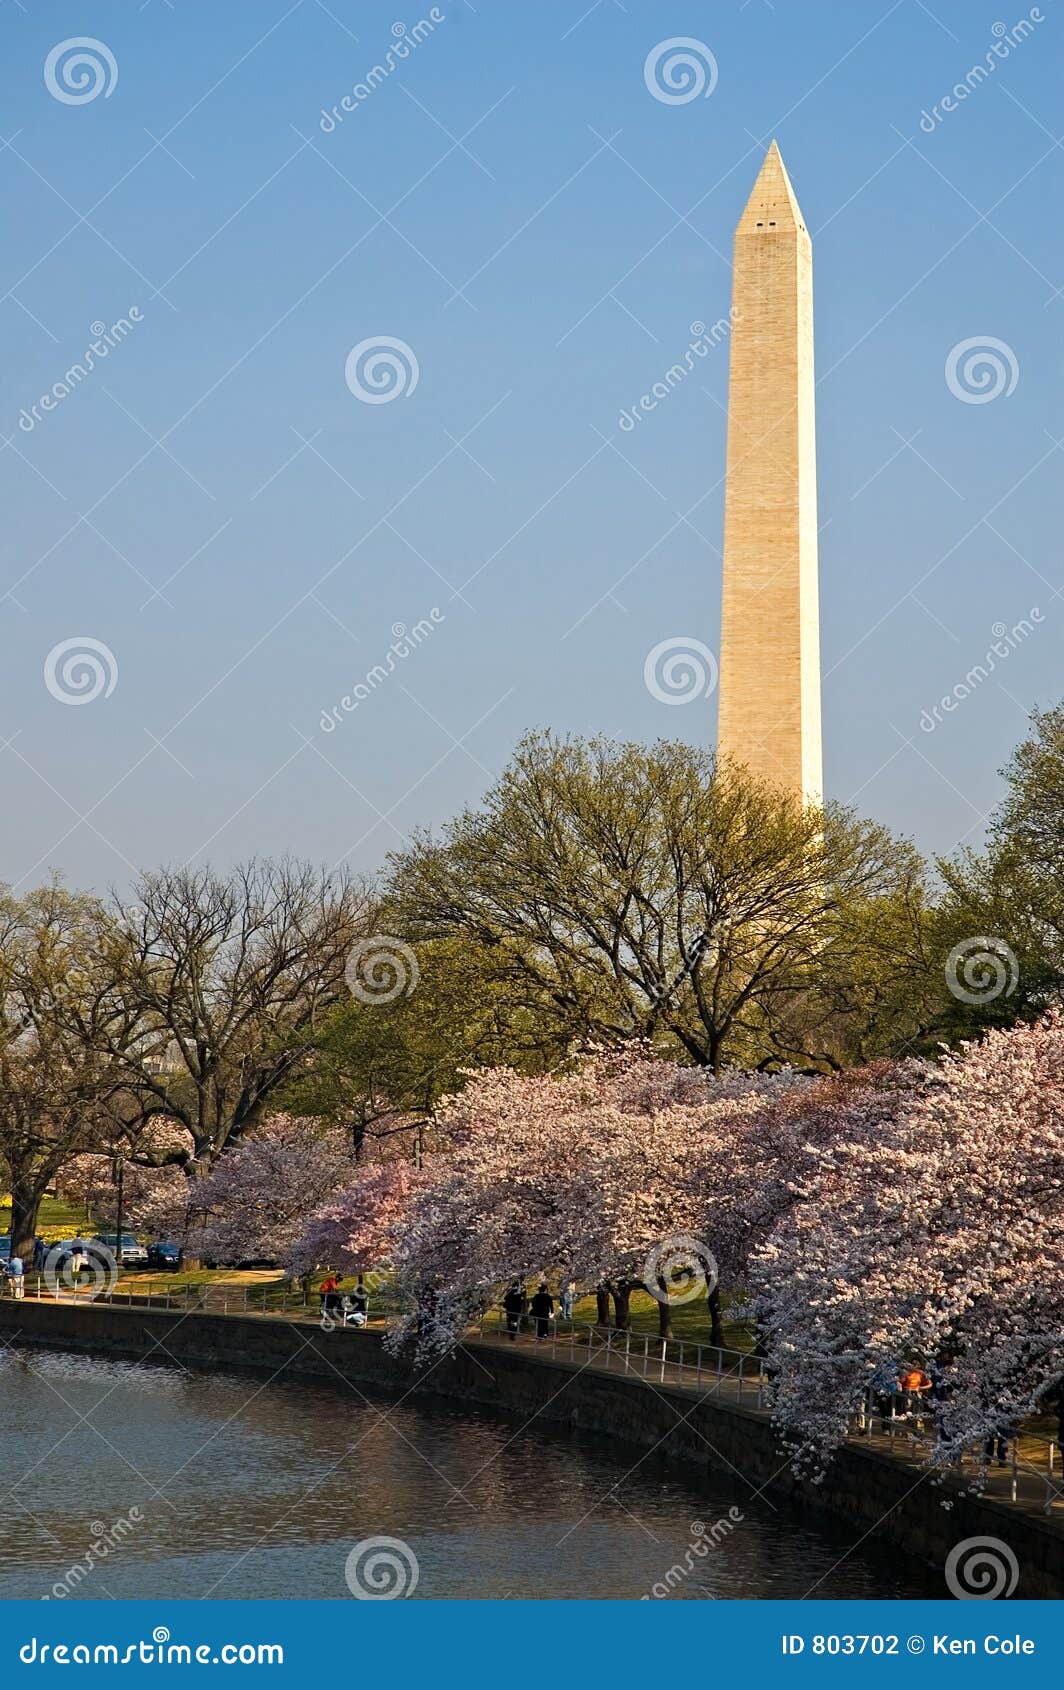 washington monument with cherry blossoms at the tidal basin